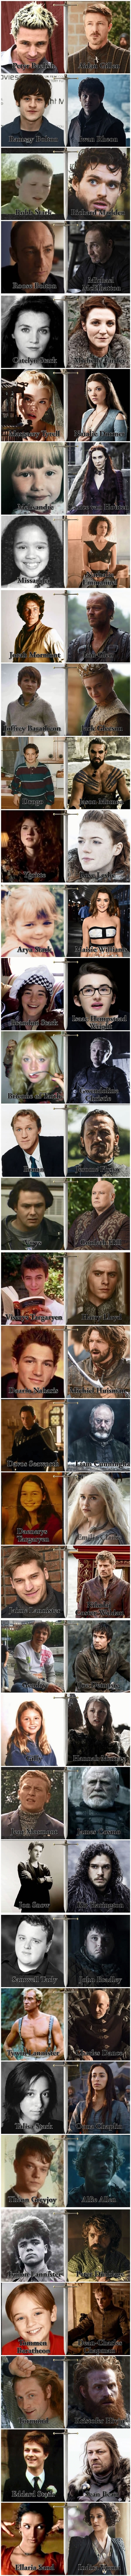 game-of-thrones-young-now